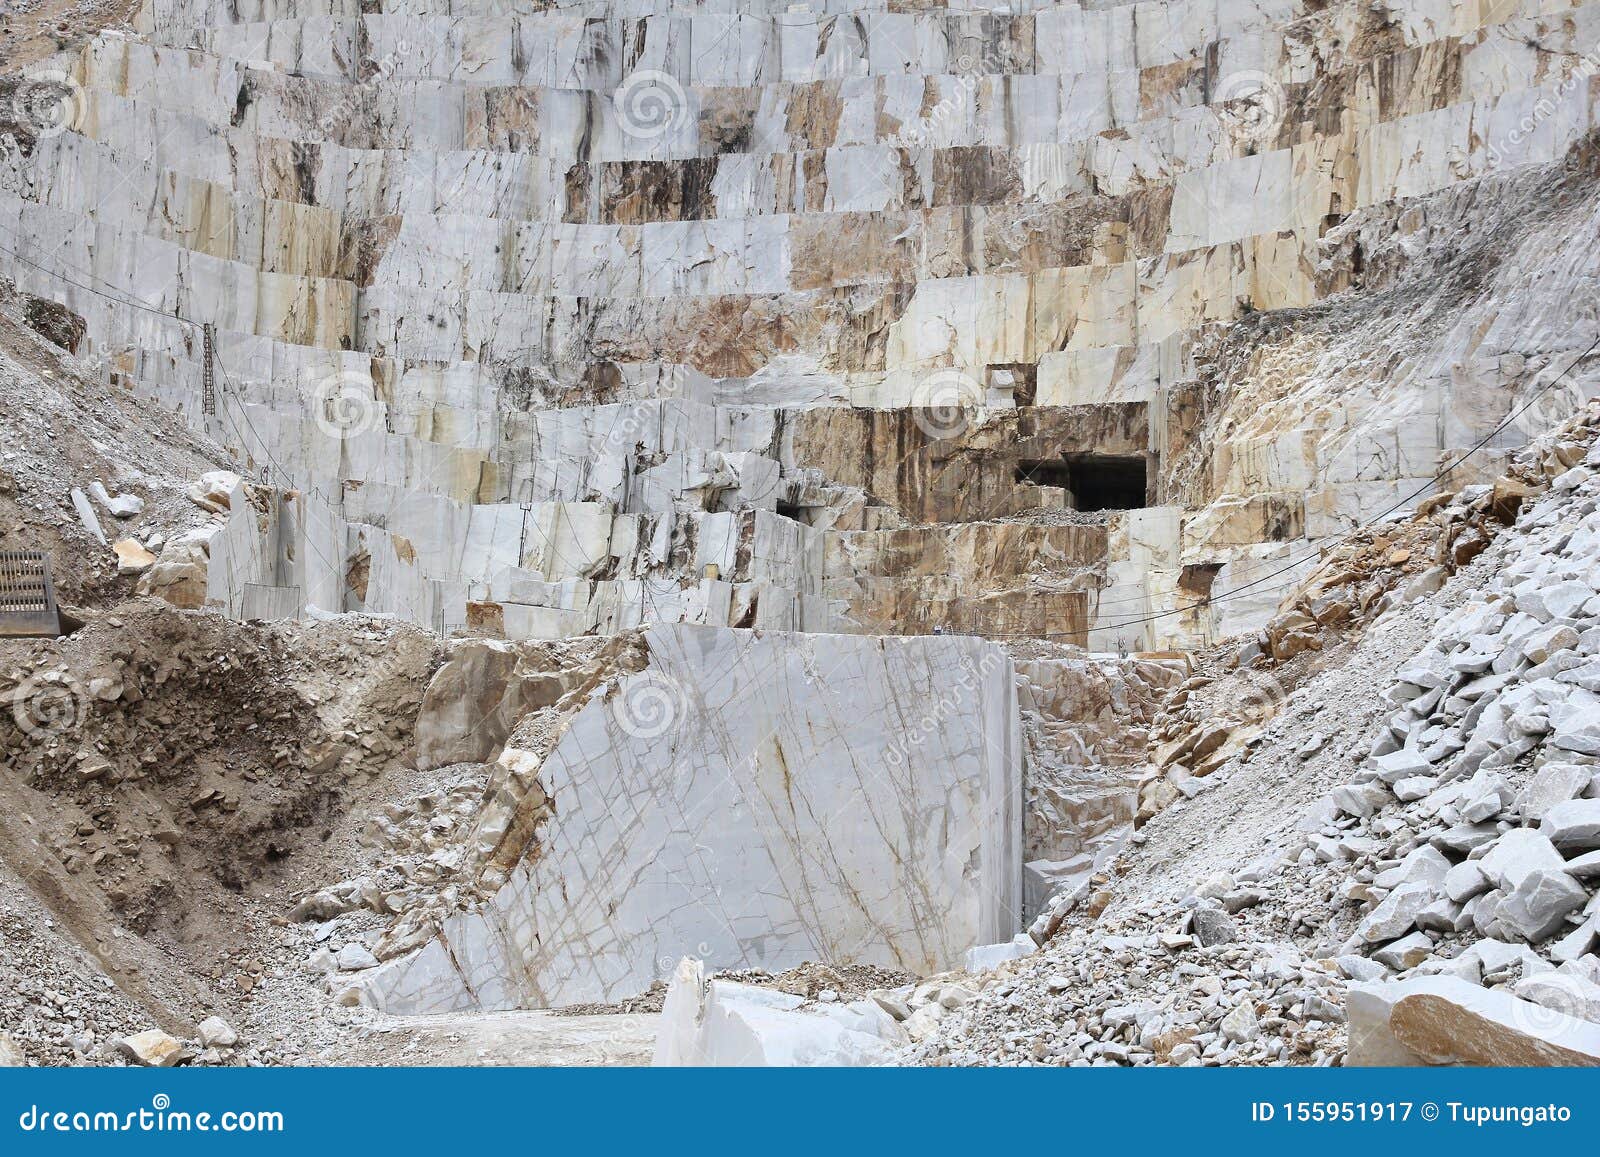  Carrara marble quarry  stock image Image of industrial 